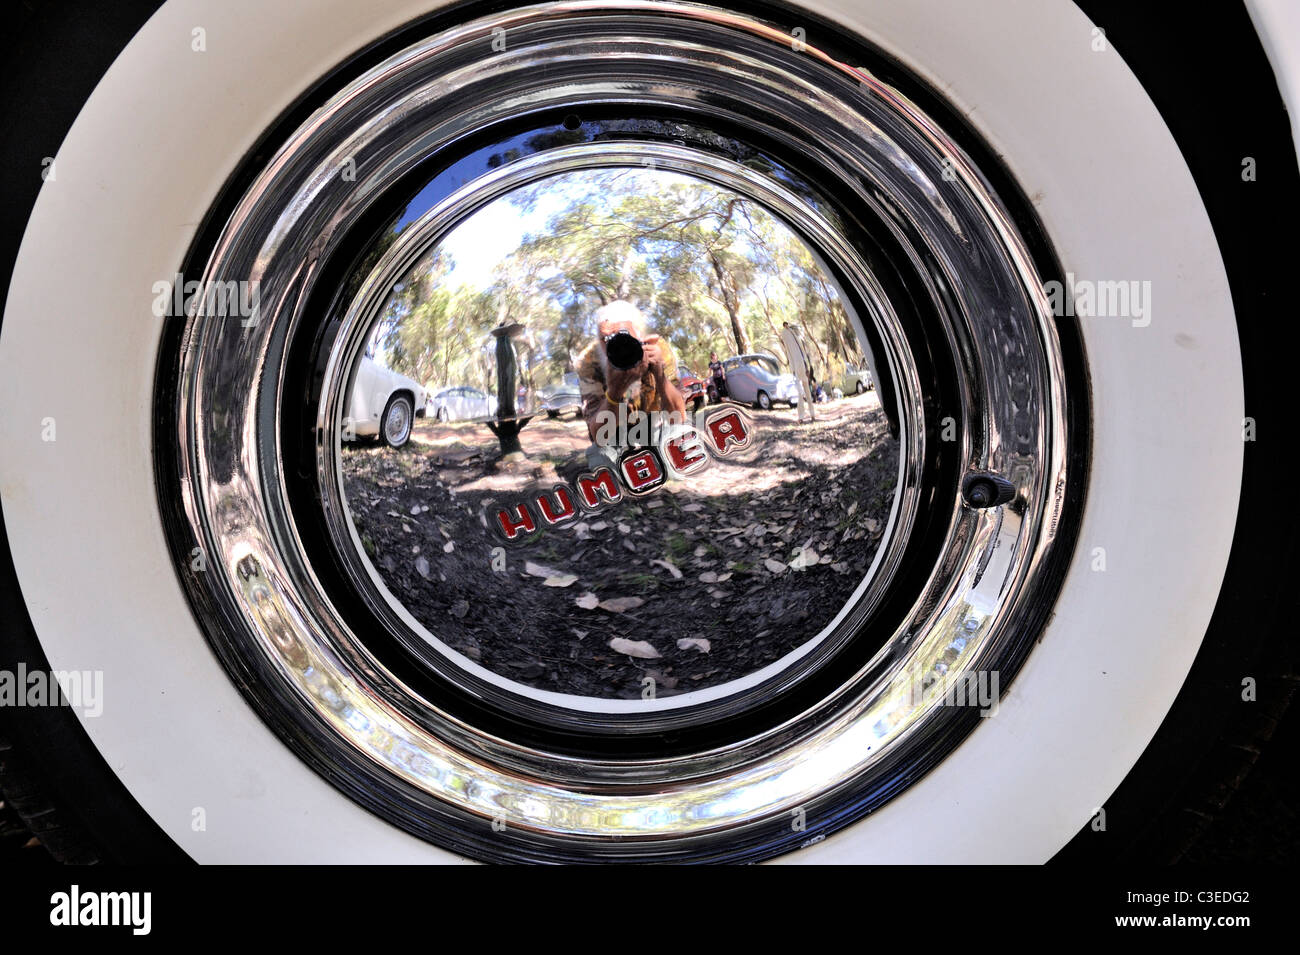 Photographer's reflection in vintage Humber automobile hubcap Stock Photo